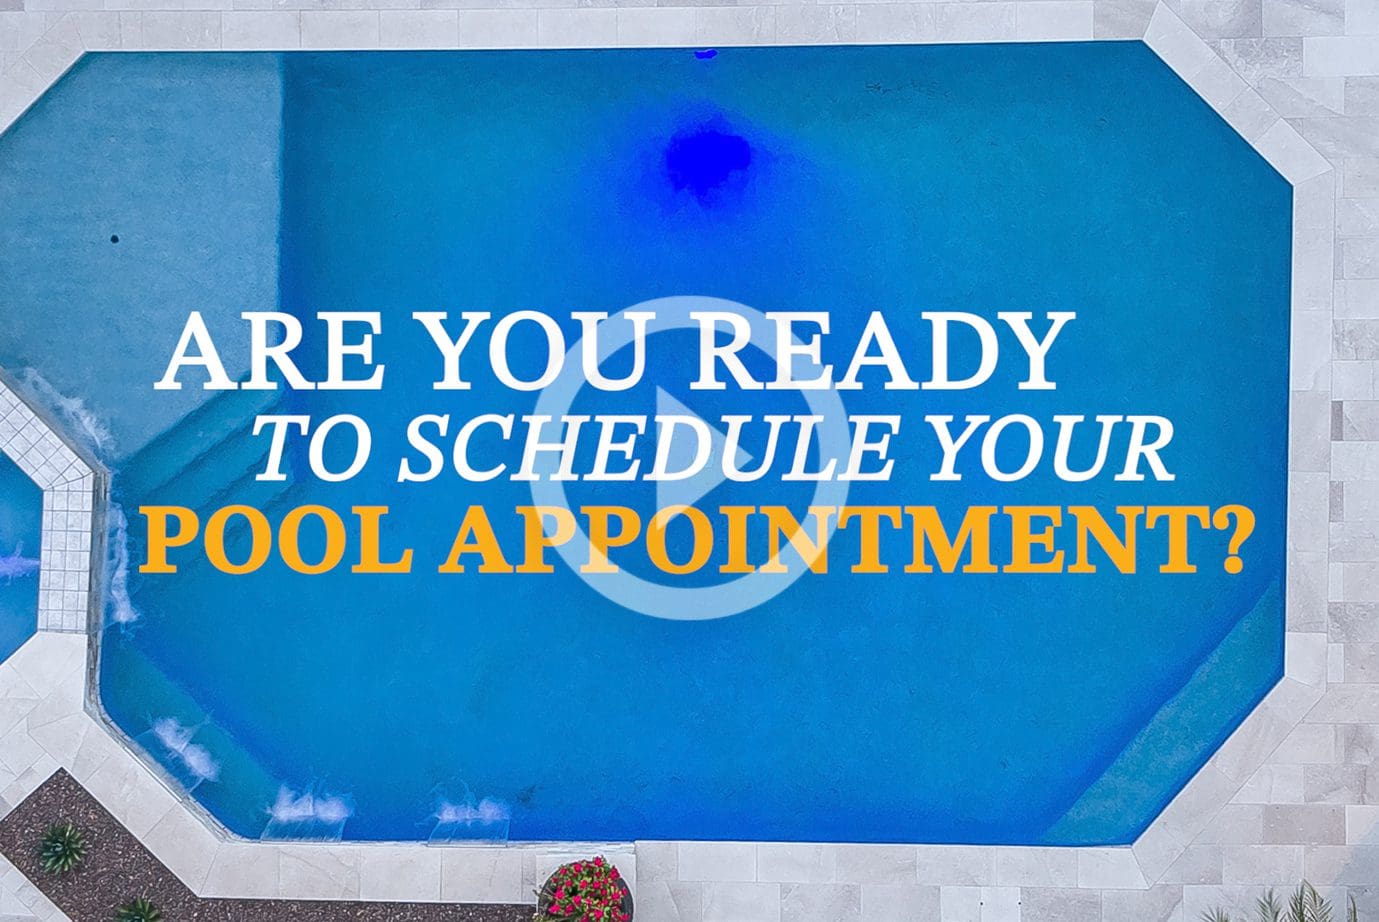 Are You Ready To Schedule Your Pool Appointment?